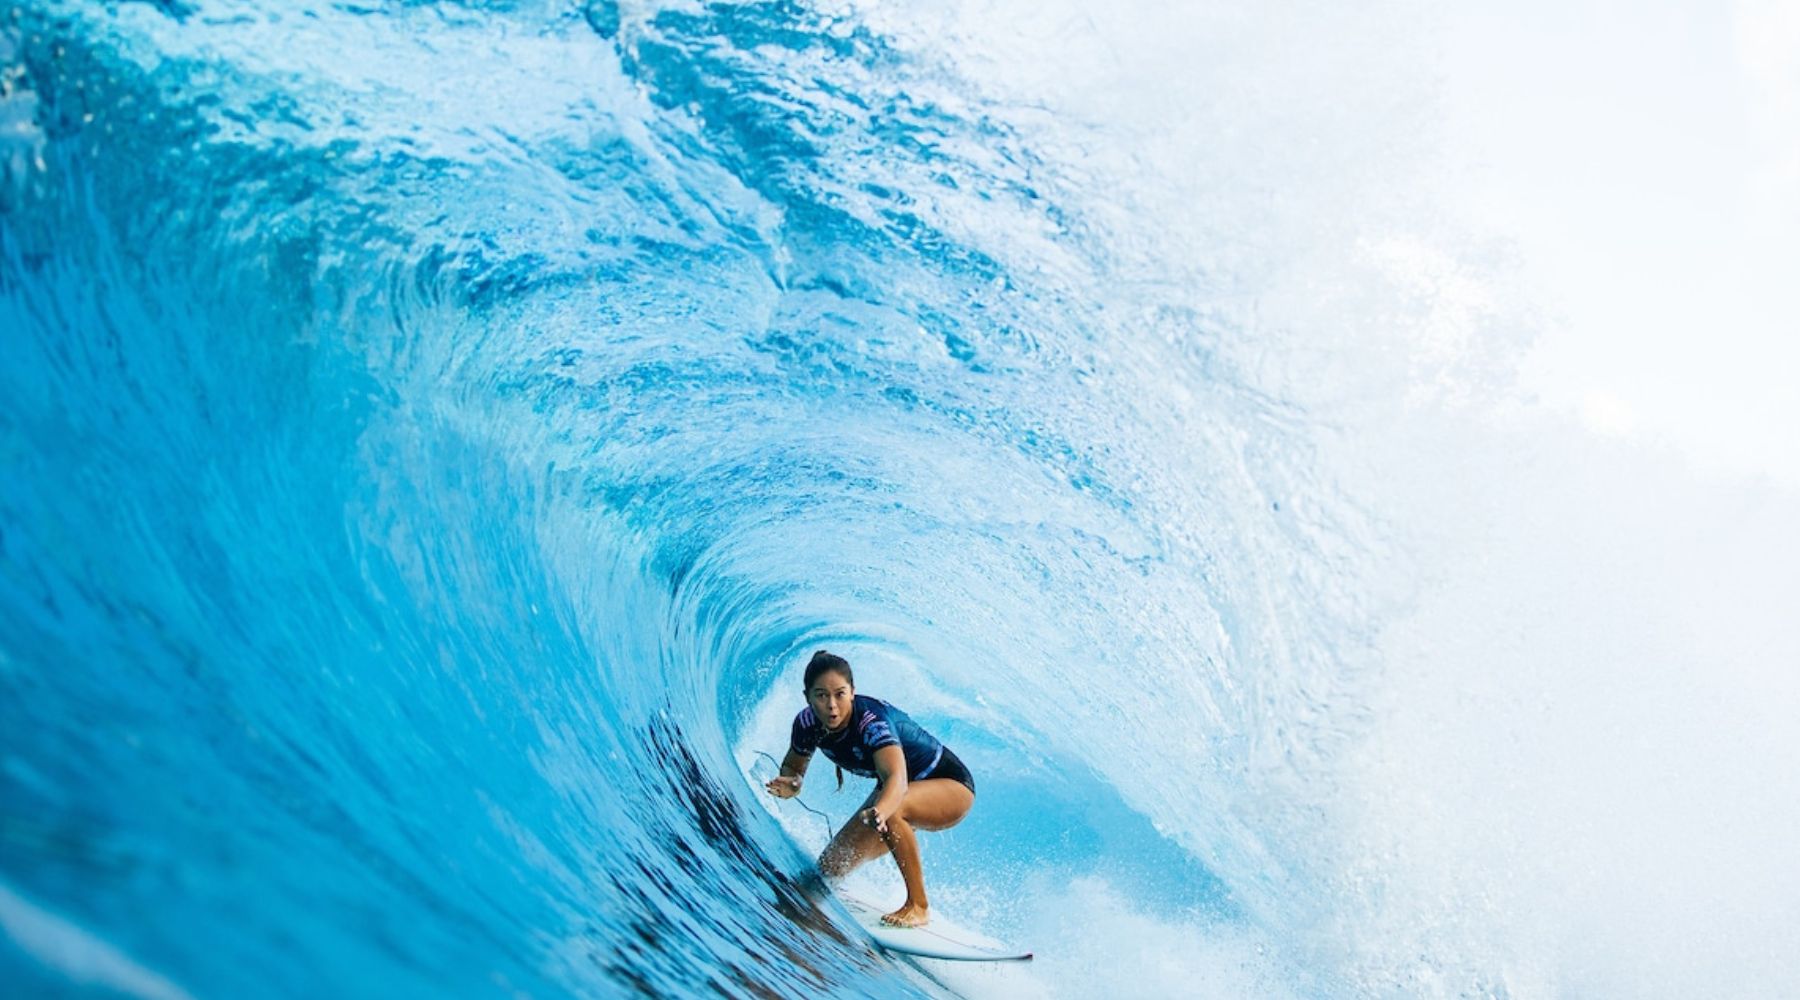 Ride the Waves in Style: A Guide to Women's Surf Apparel